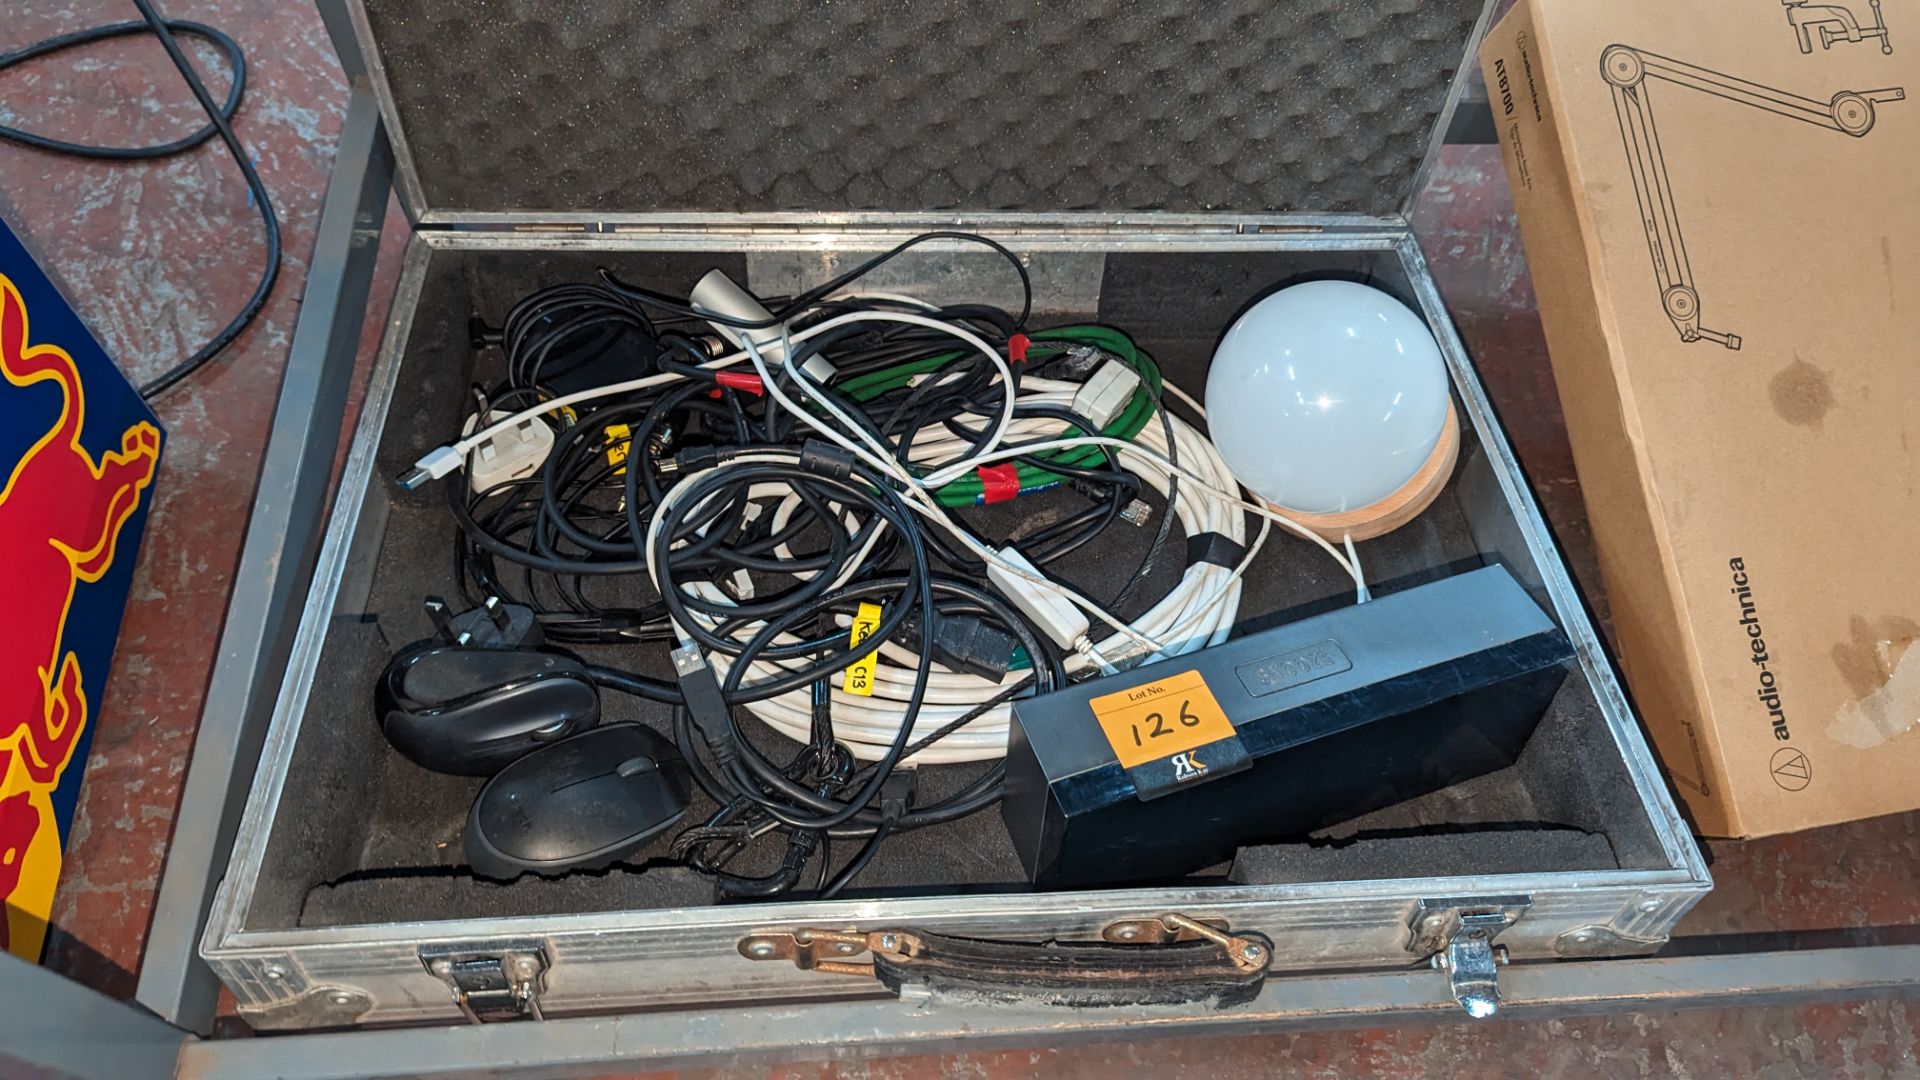 Flight case and contents of assorted cables and miscellaneous items - Image 3 of 6